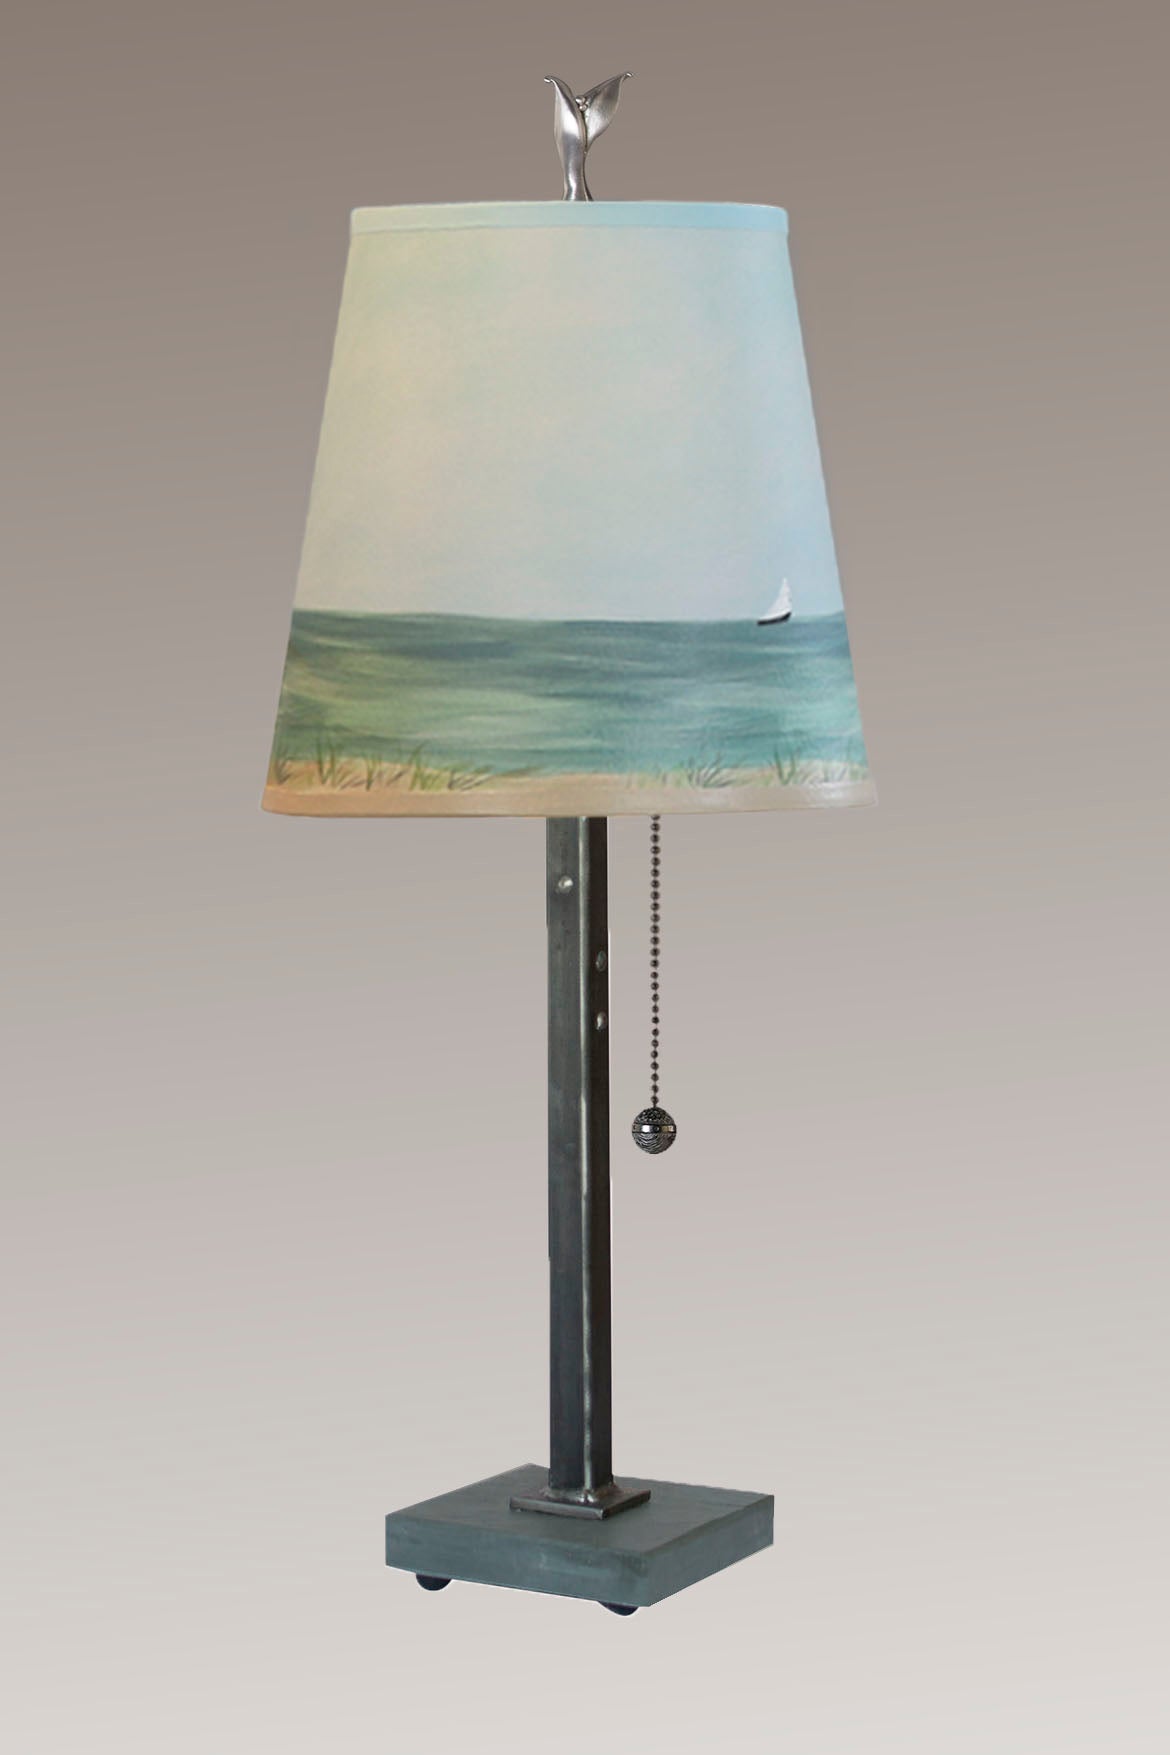 Janna Ugone & Co Table Lamps Steel Table Lamp with Small Drum Shade in Shore